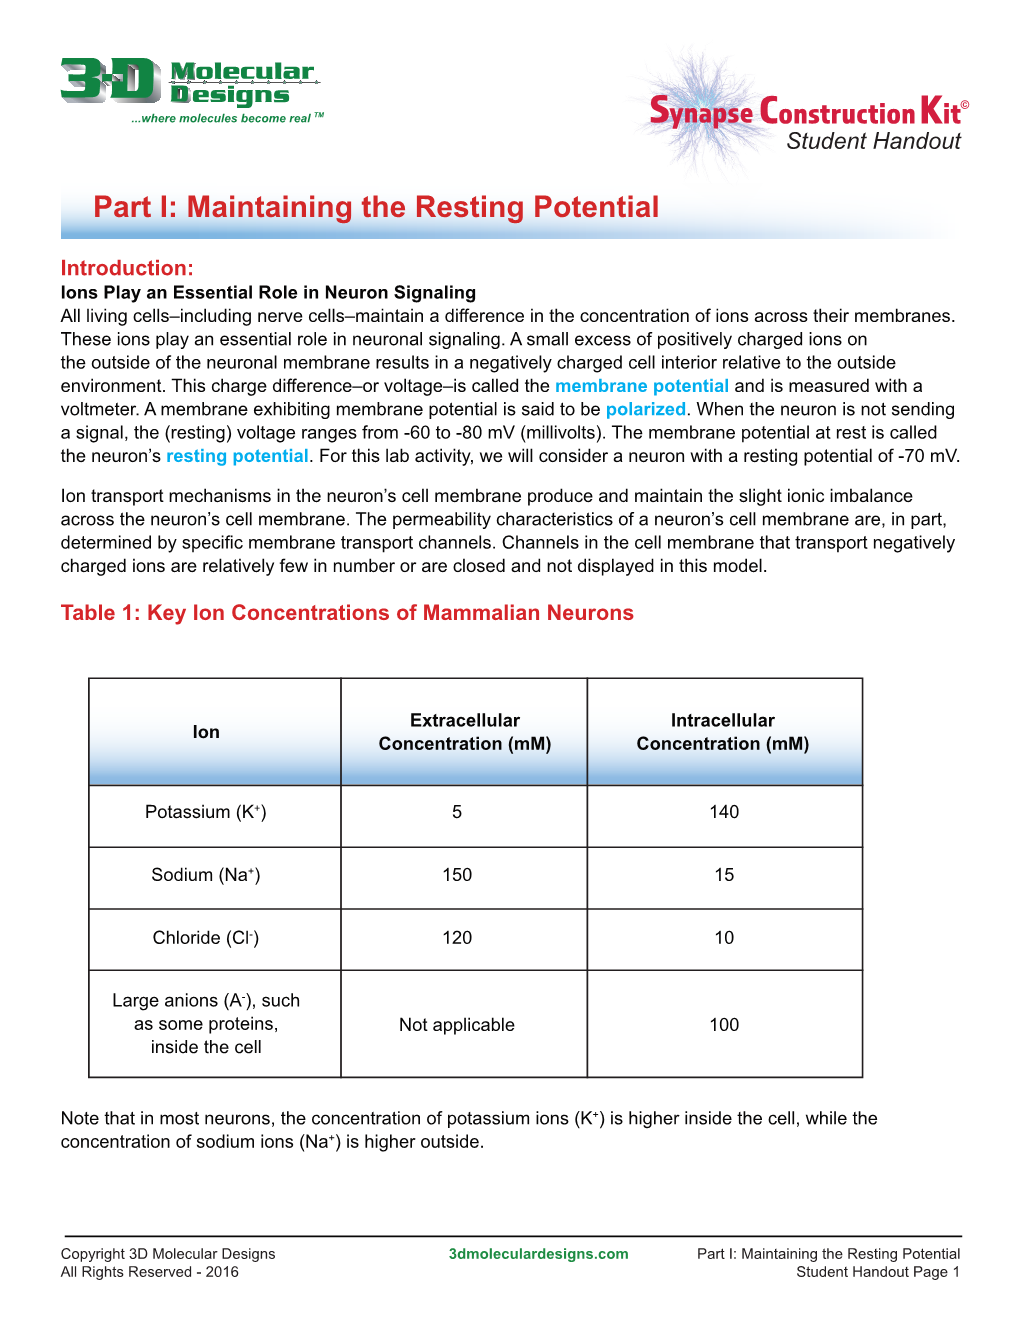 Part I: Maintaining the Resting Potential